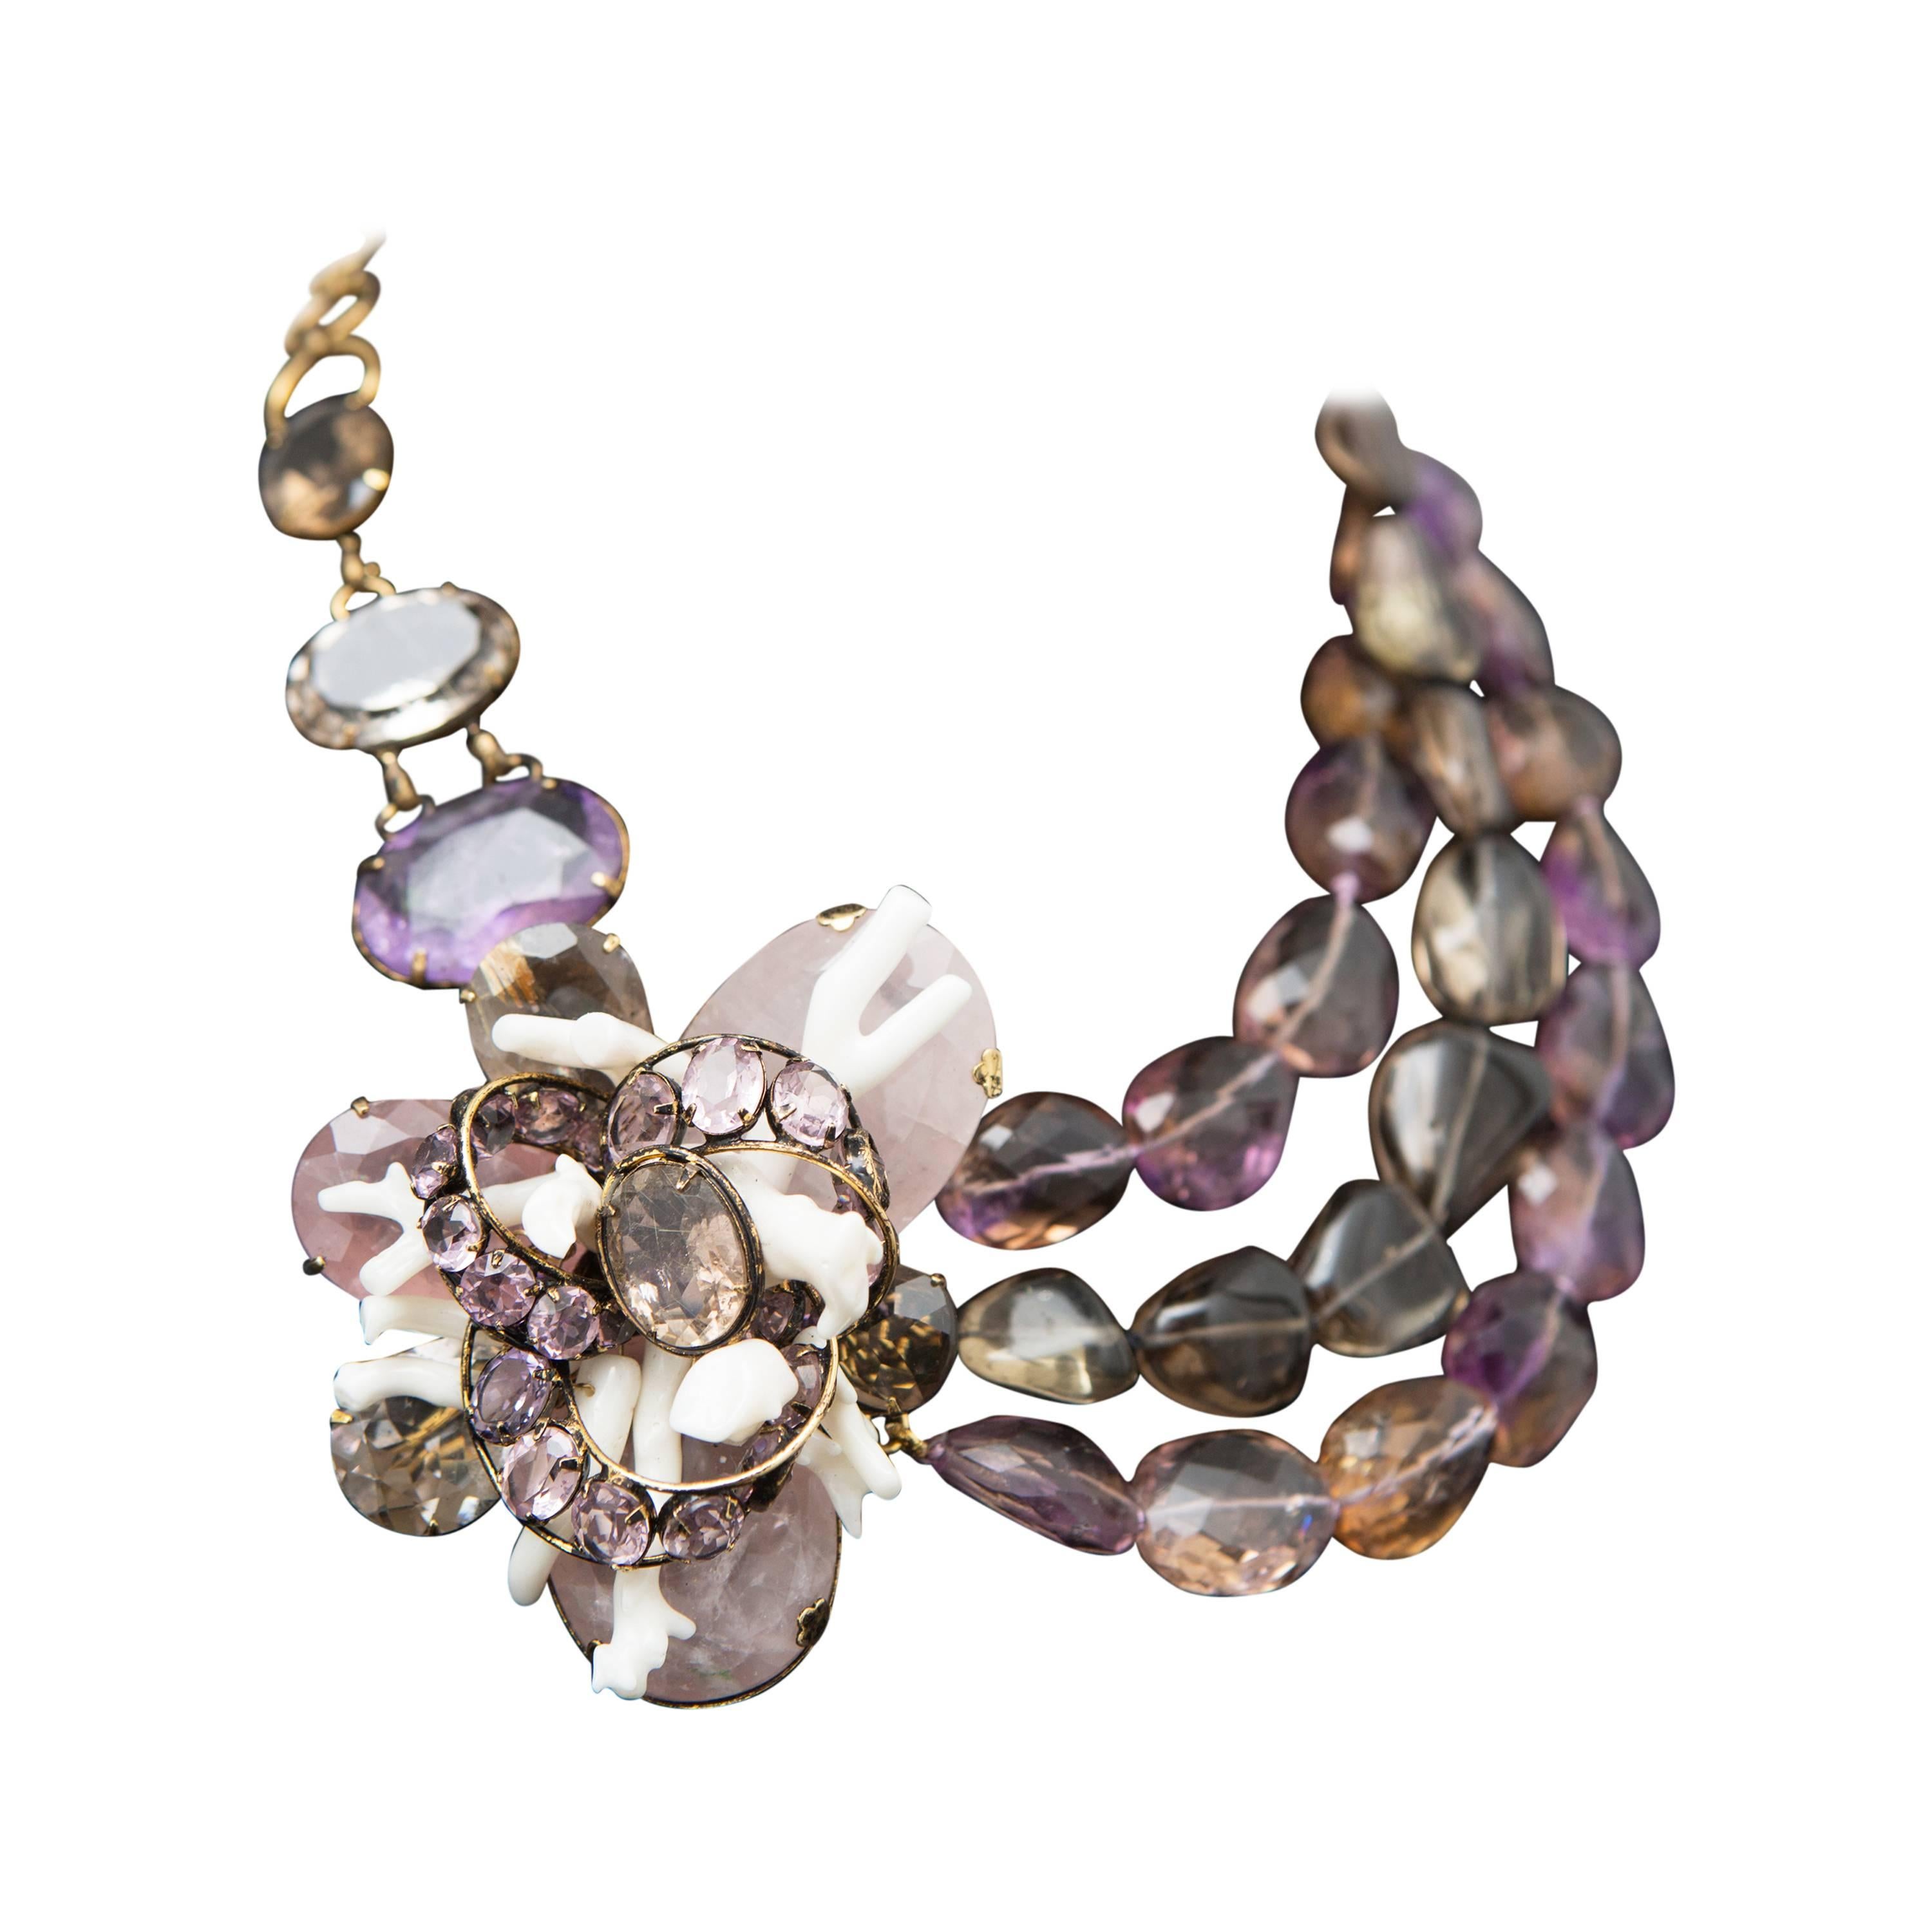 Iradj Moini Amethyst Necklace with Detachable Brooch